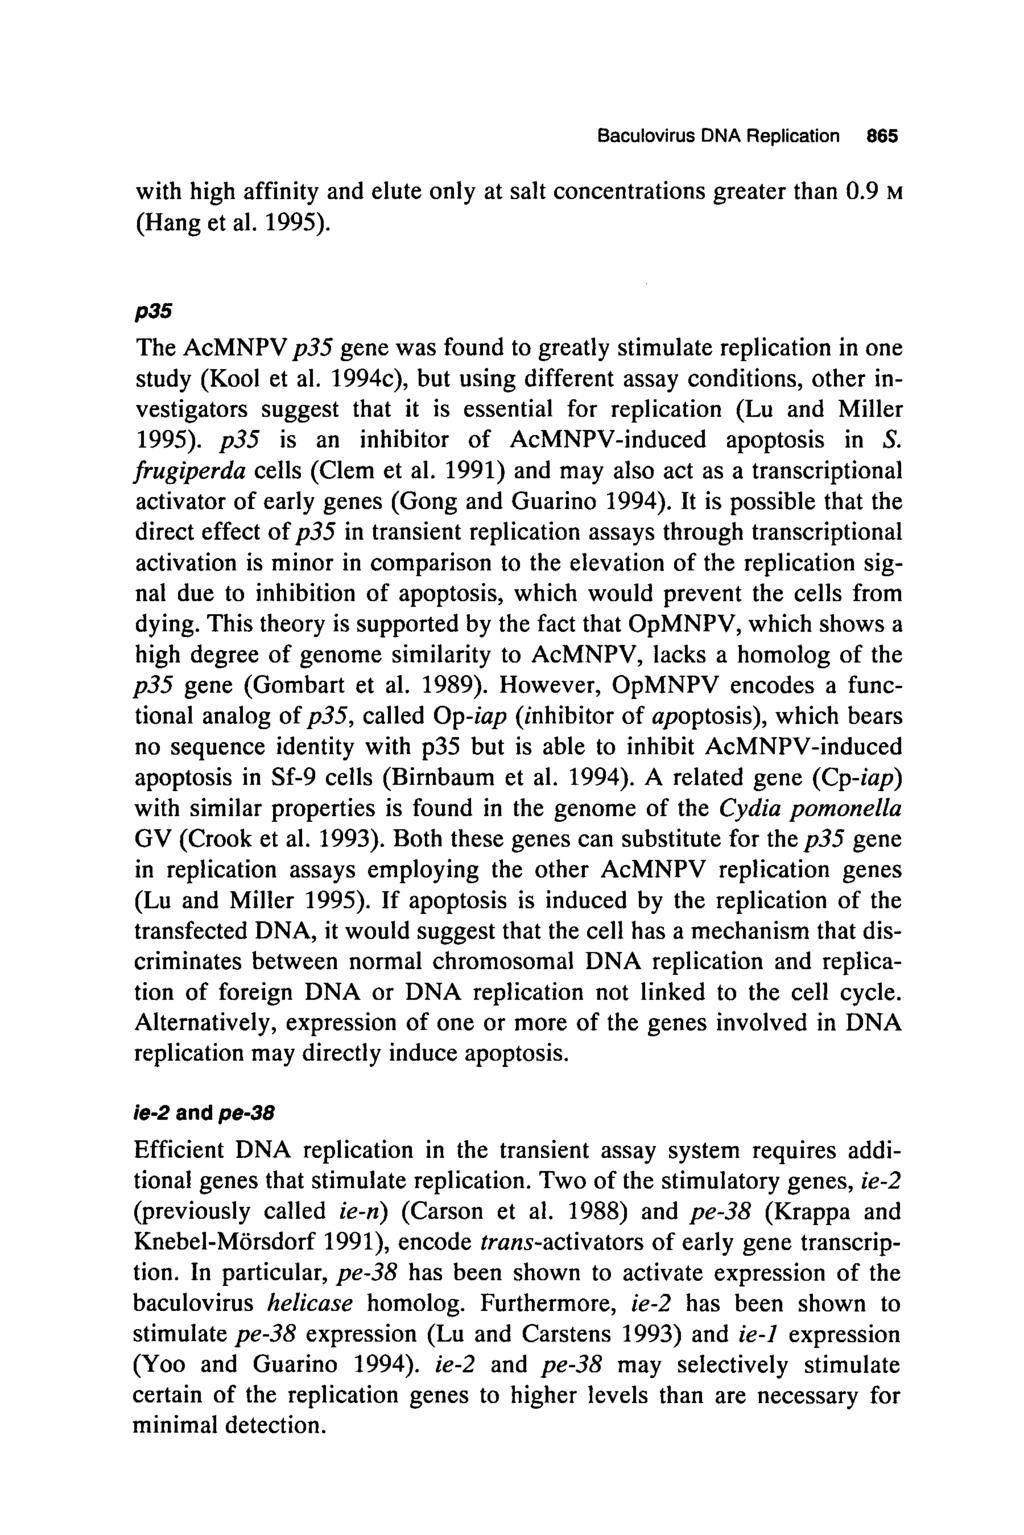 Baculovirus DNA Replication 865 with high affinity and elute only at salt concentrations greater than 0.9 M (Hang et al. 1995).